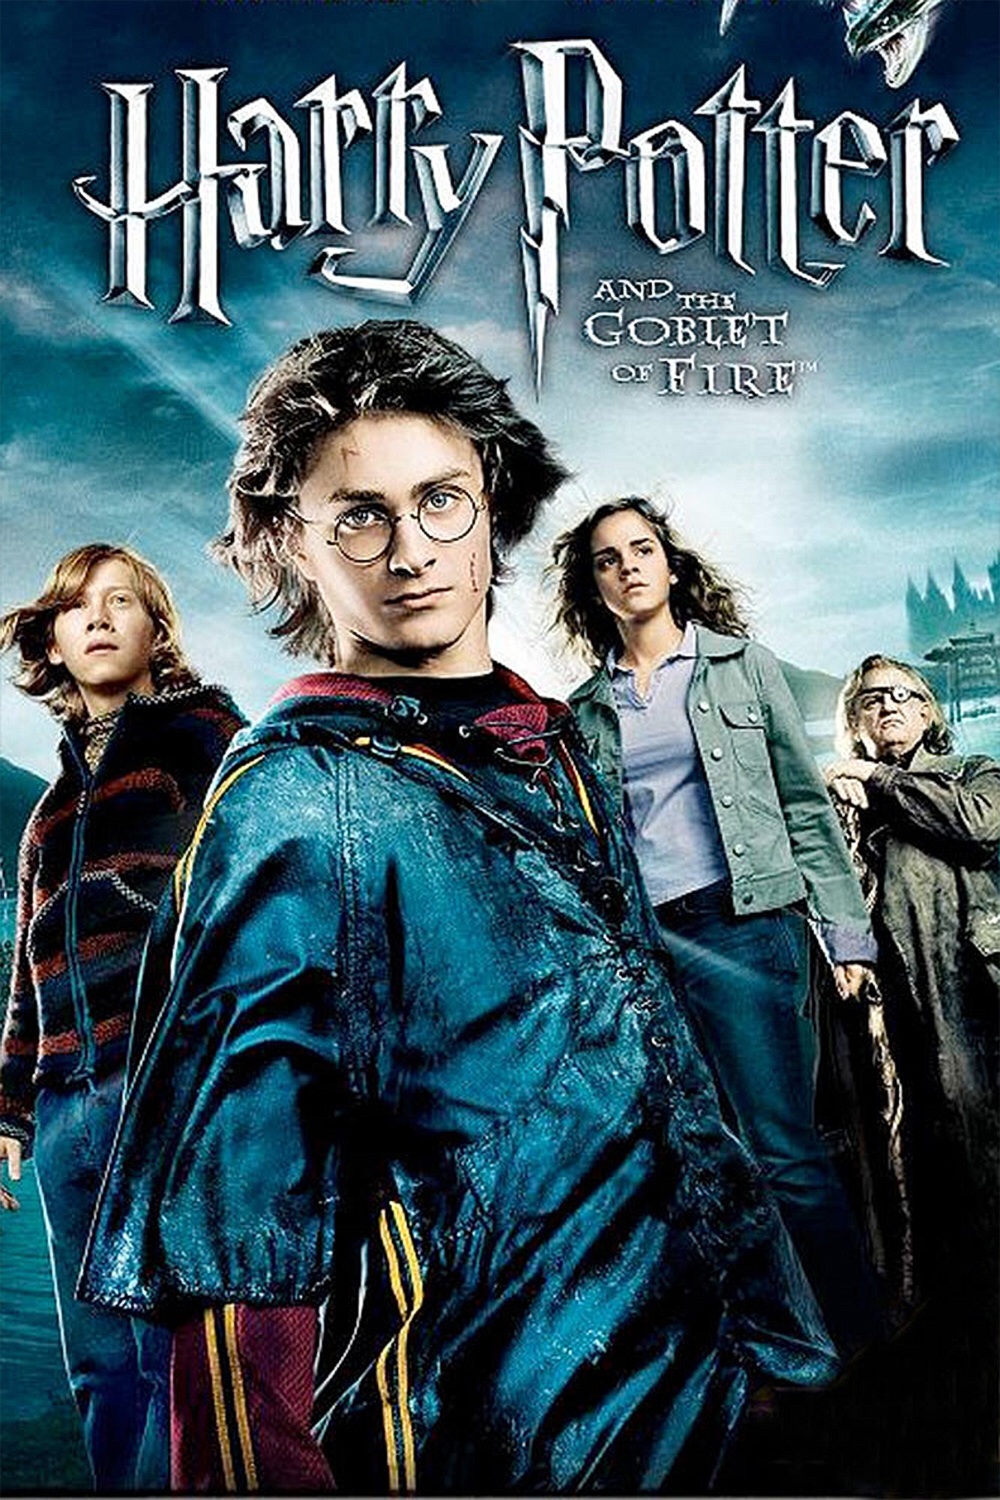 harry potter and the goblet of fire movie full movie